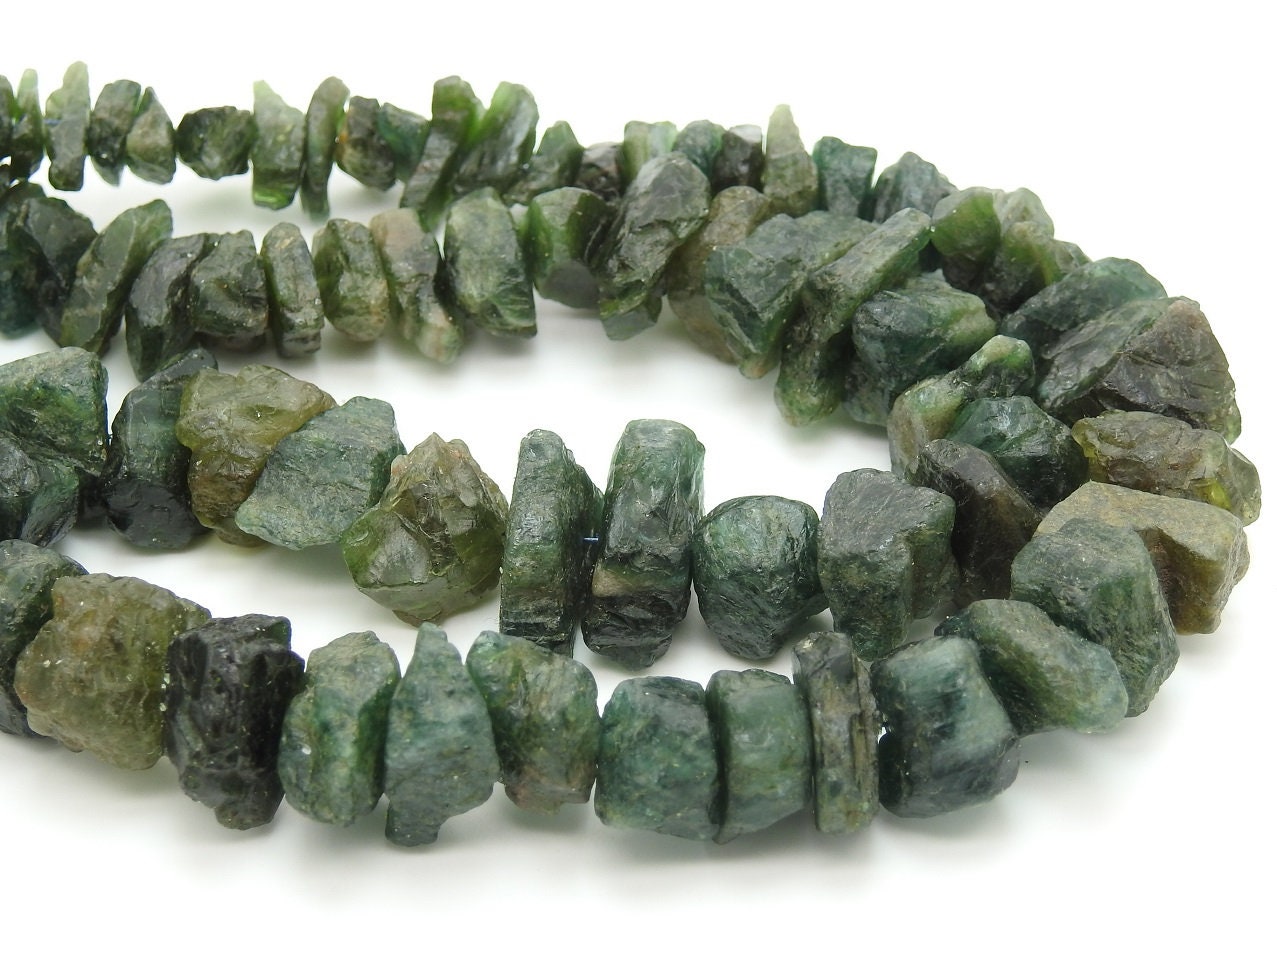 Dark Green Apatite Rough Bead,Anklets,Uncut,Chips,Nuggets,Loose Raw,8Inch Strand 15X10To6X5MM Approx,Wholesaler,Supplies 100%Natural PME-RB5 | Save 33% - Rajasthan Living 12